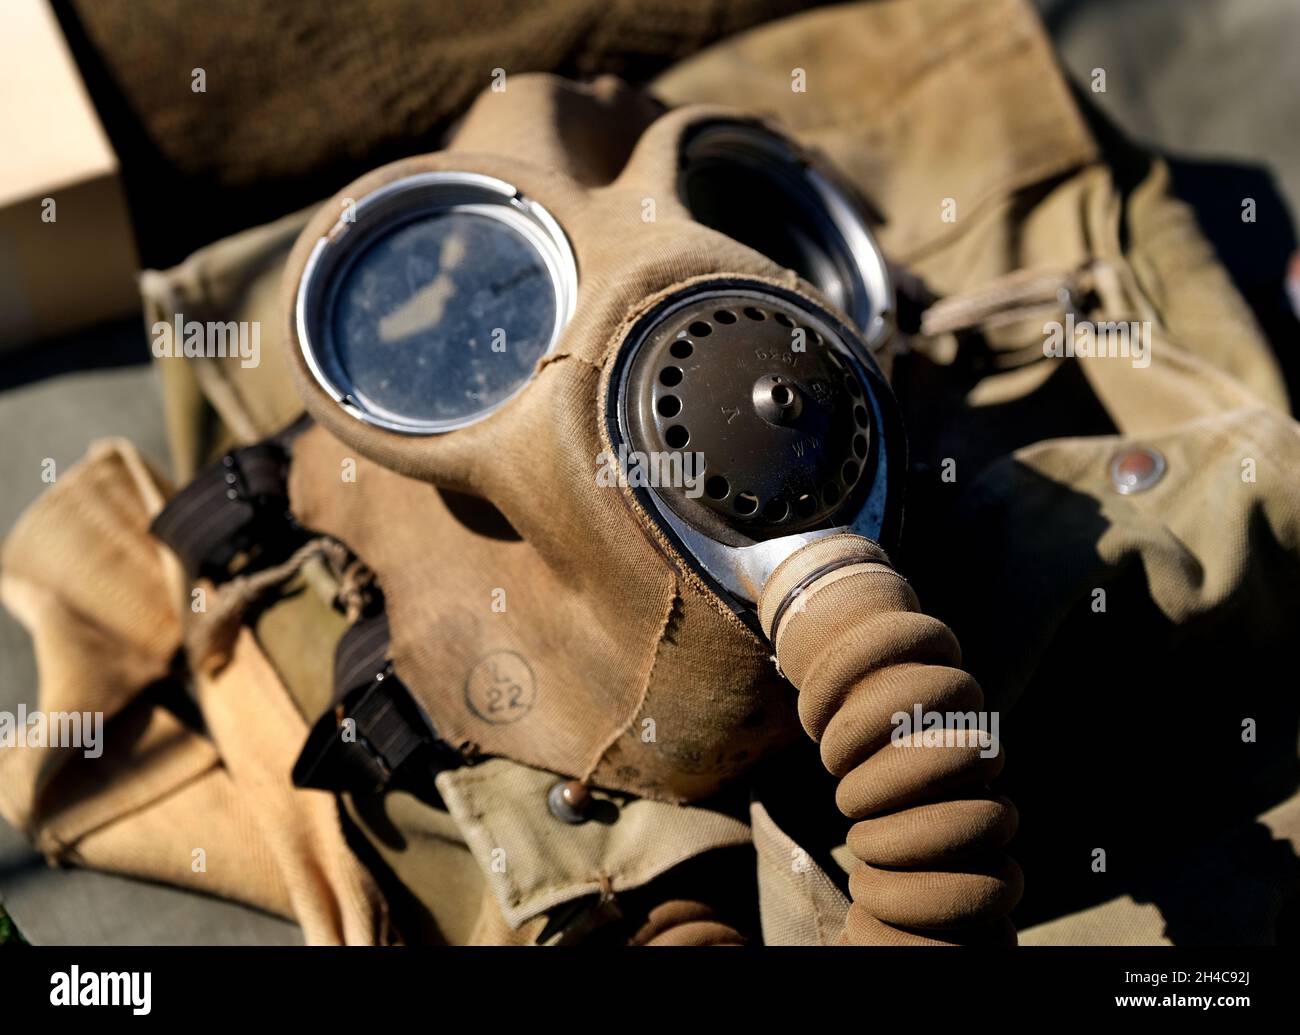 Second world war issue gas mask. Stock Photo